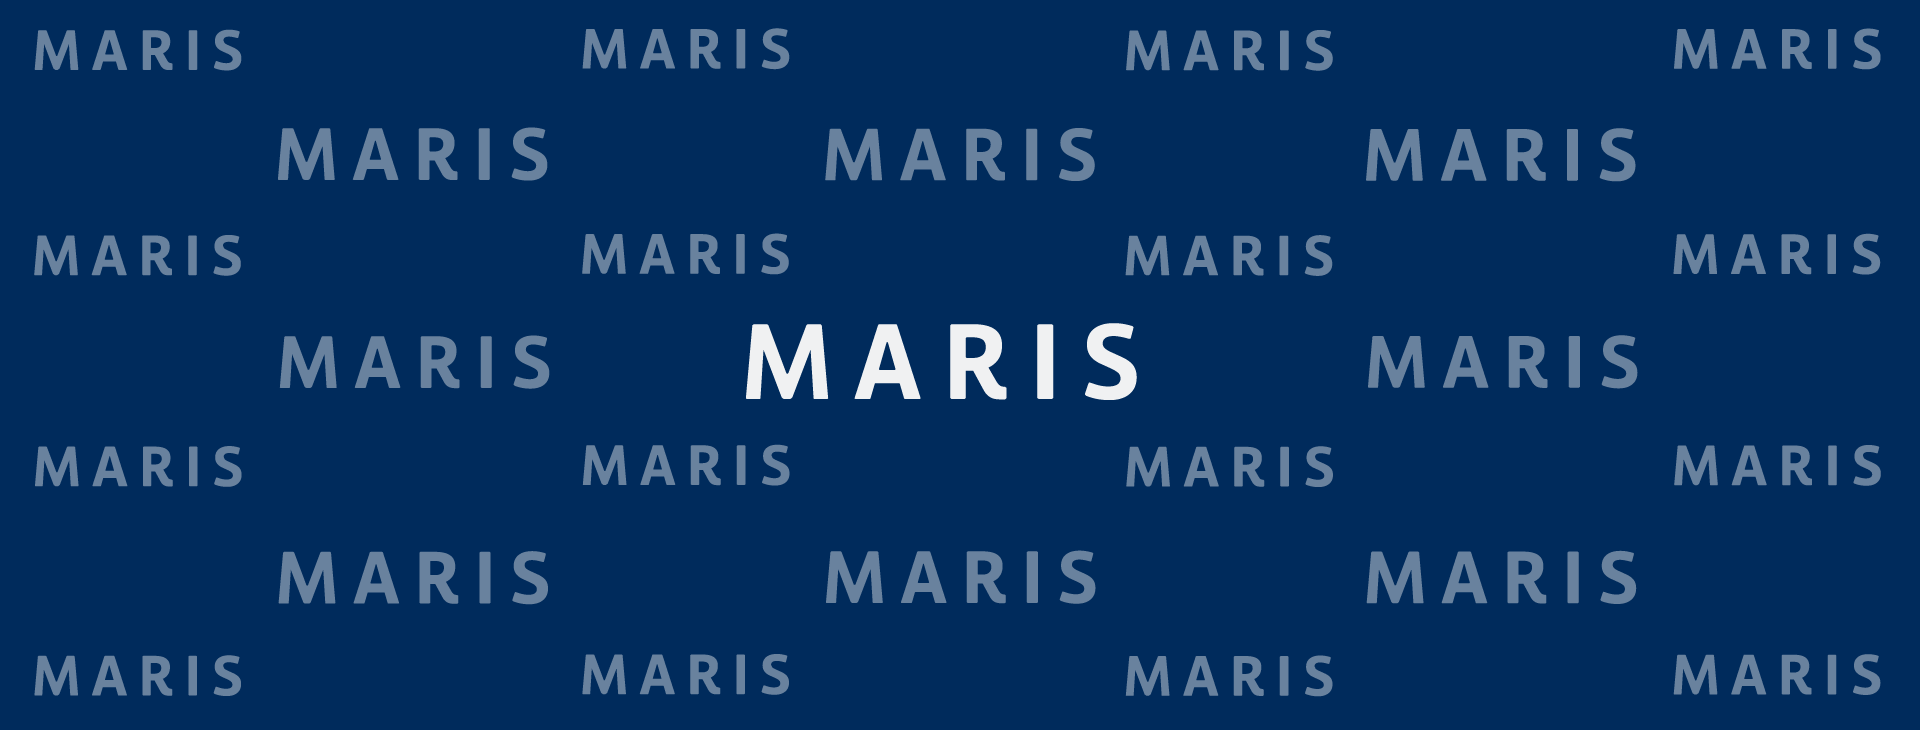 Image for PR: MARIS Appoints External Board Members to Provide Industry Perspective